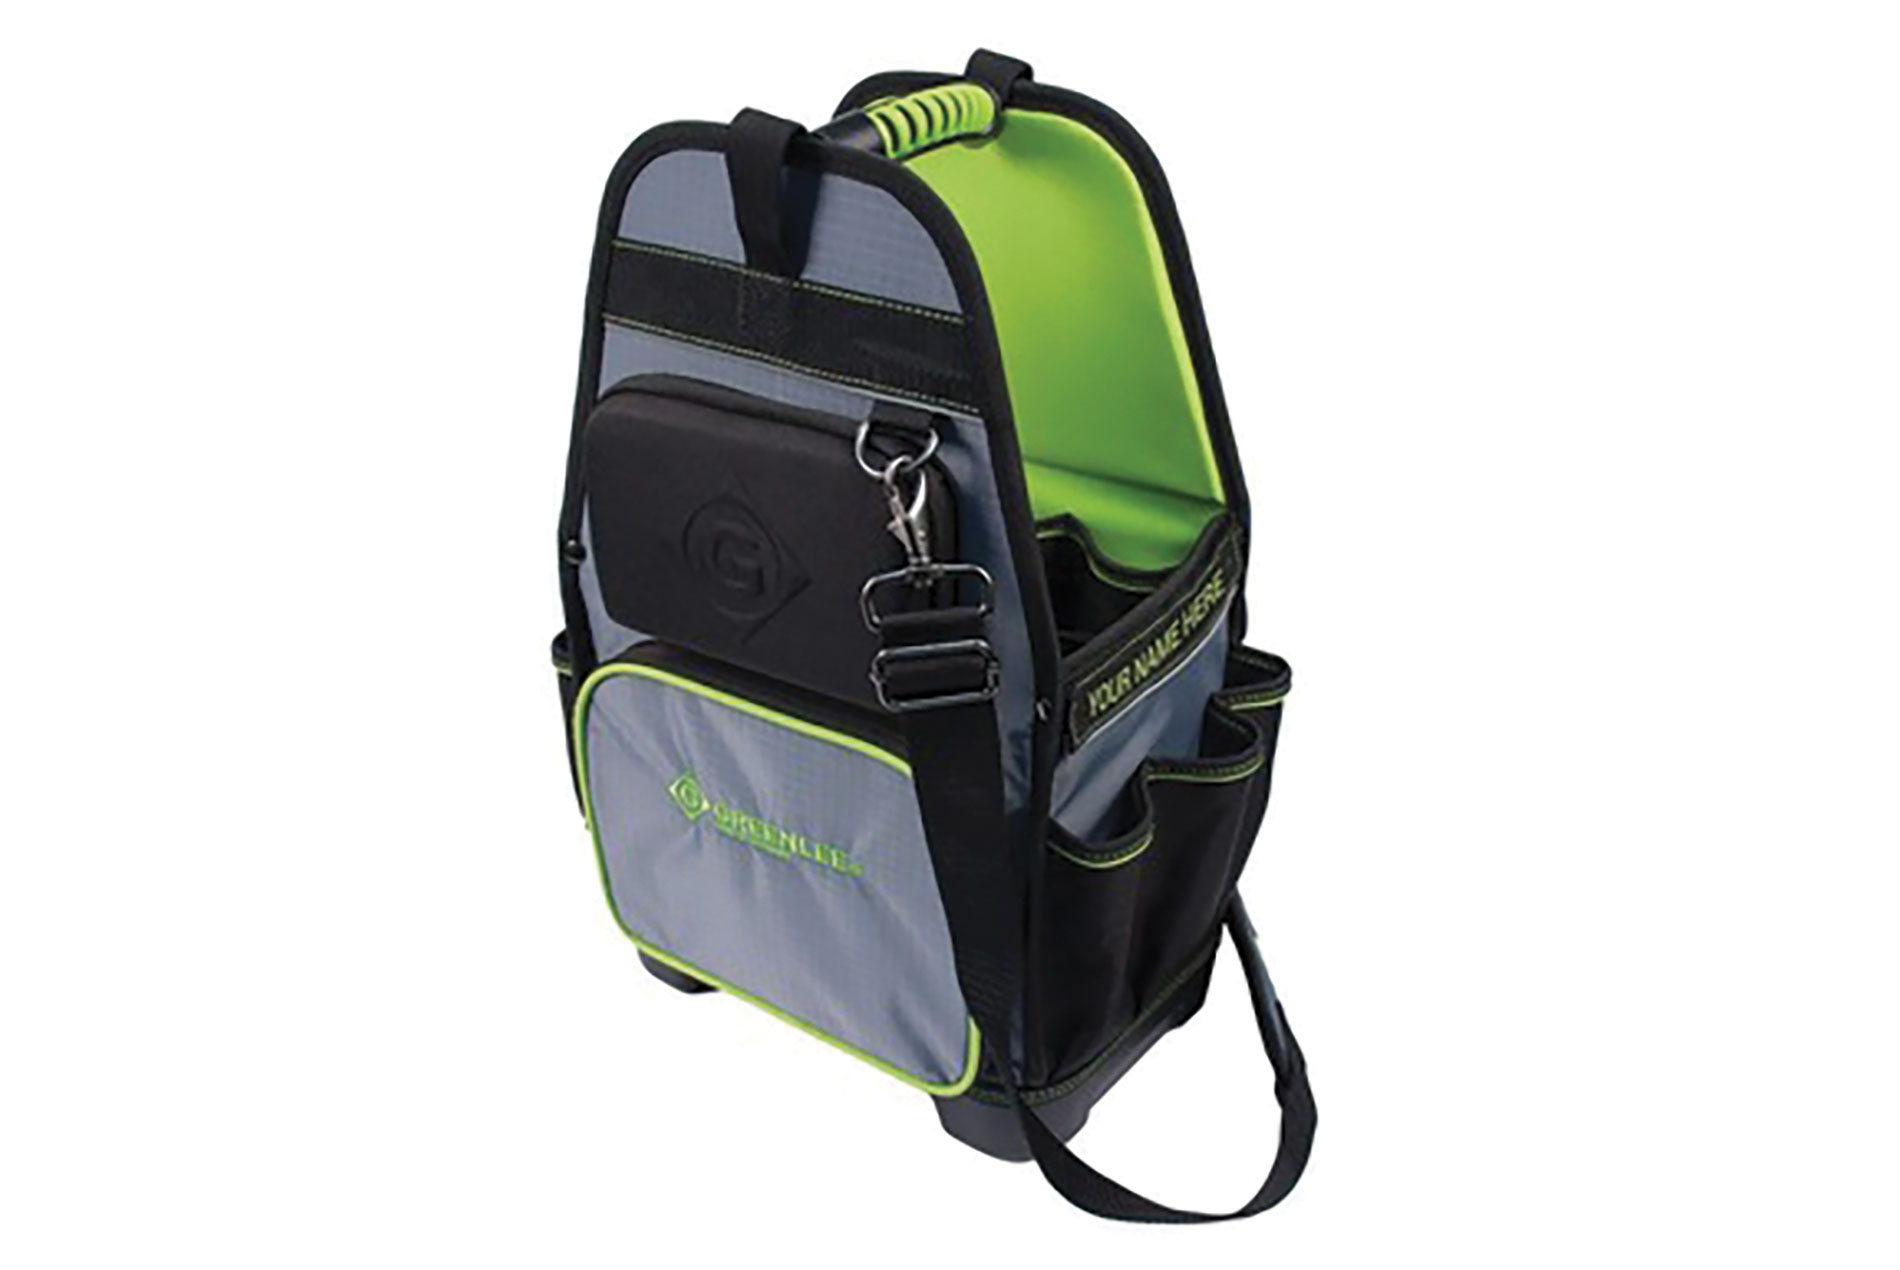 Black, gray and green tool bag with a hard bottom and long strap. Image by Greenlee.